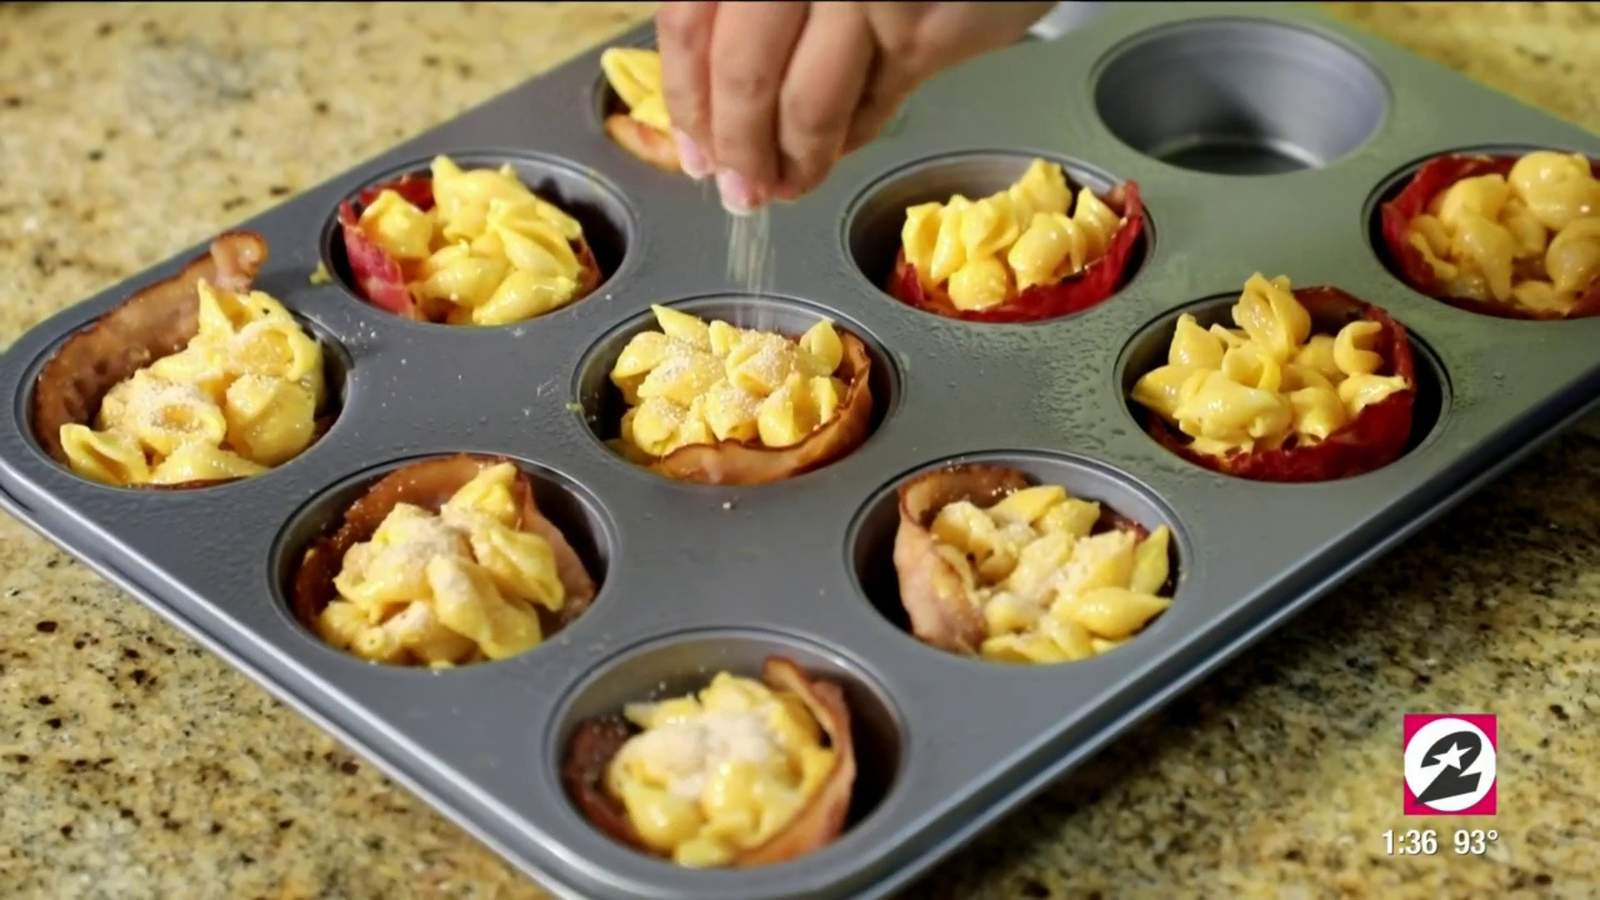 Celebrate National Mac & Cheese Day with this simple bacon mac & cheese bites recipe